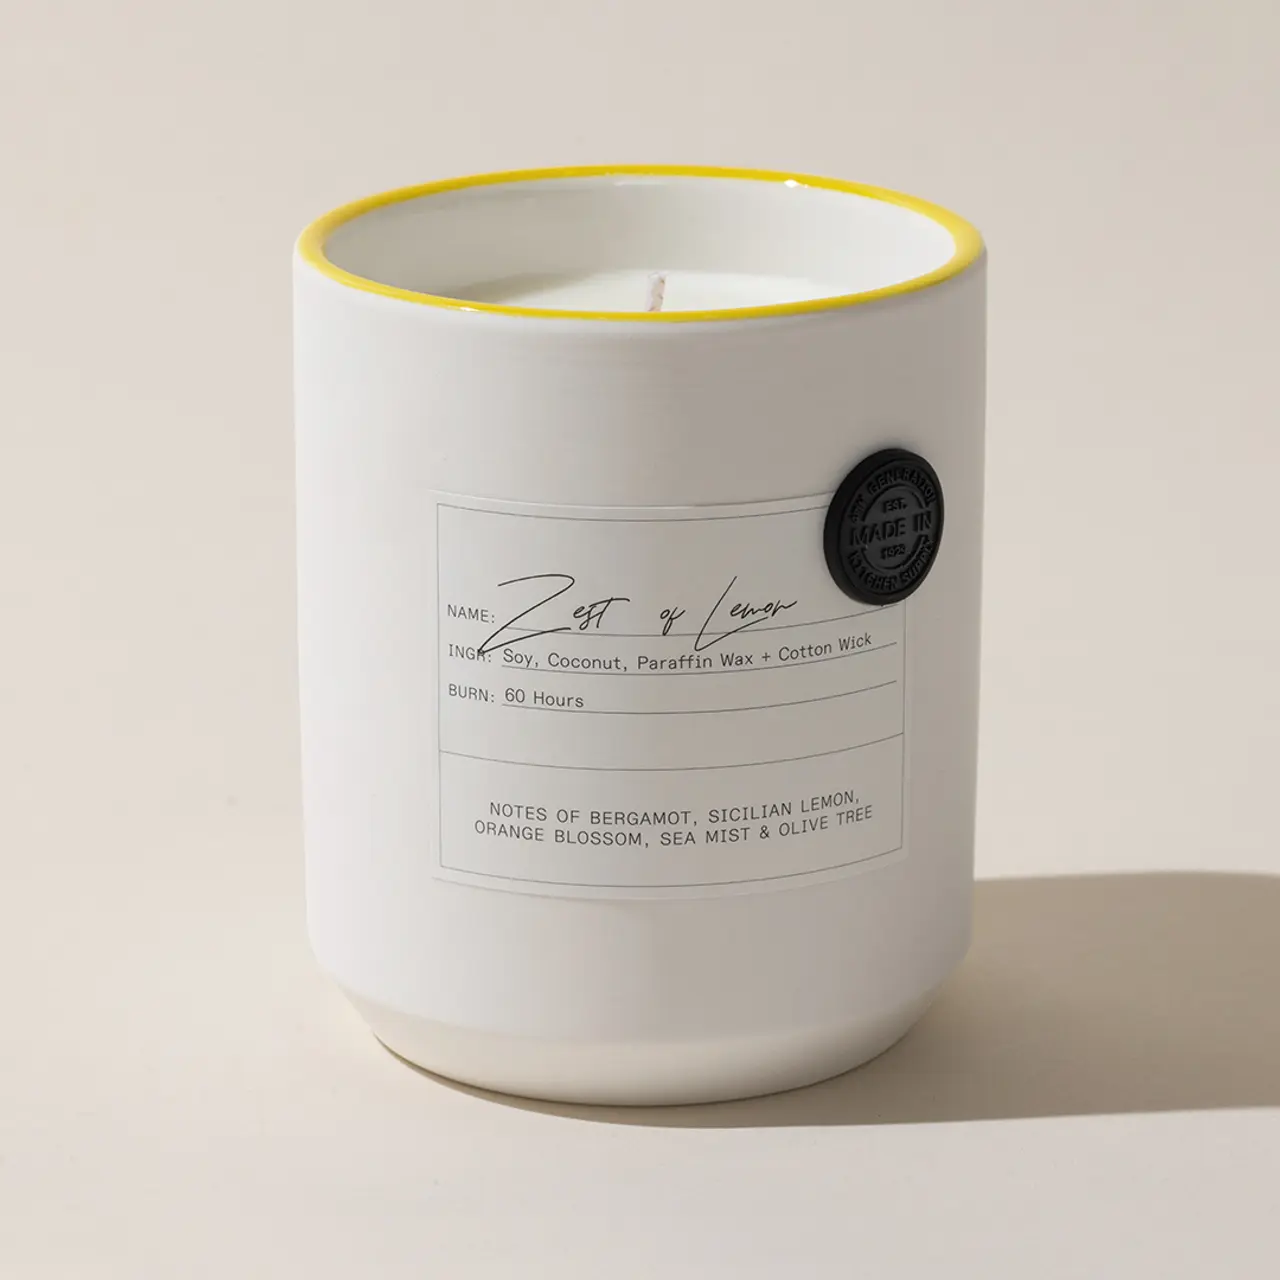 A lit scented candle with a yellow rim and label detailing its fragrance notes and ingredients is displayed against a plain background.